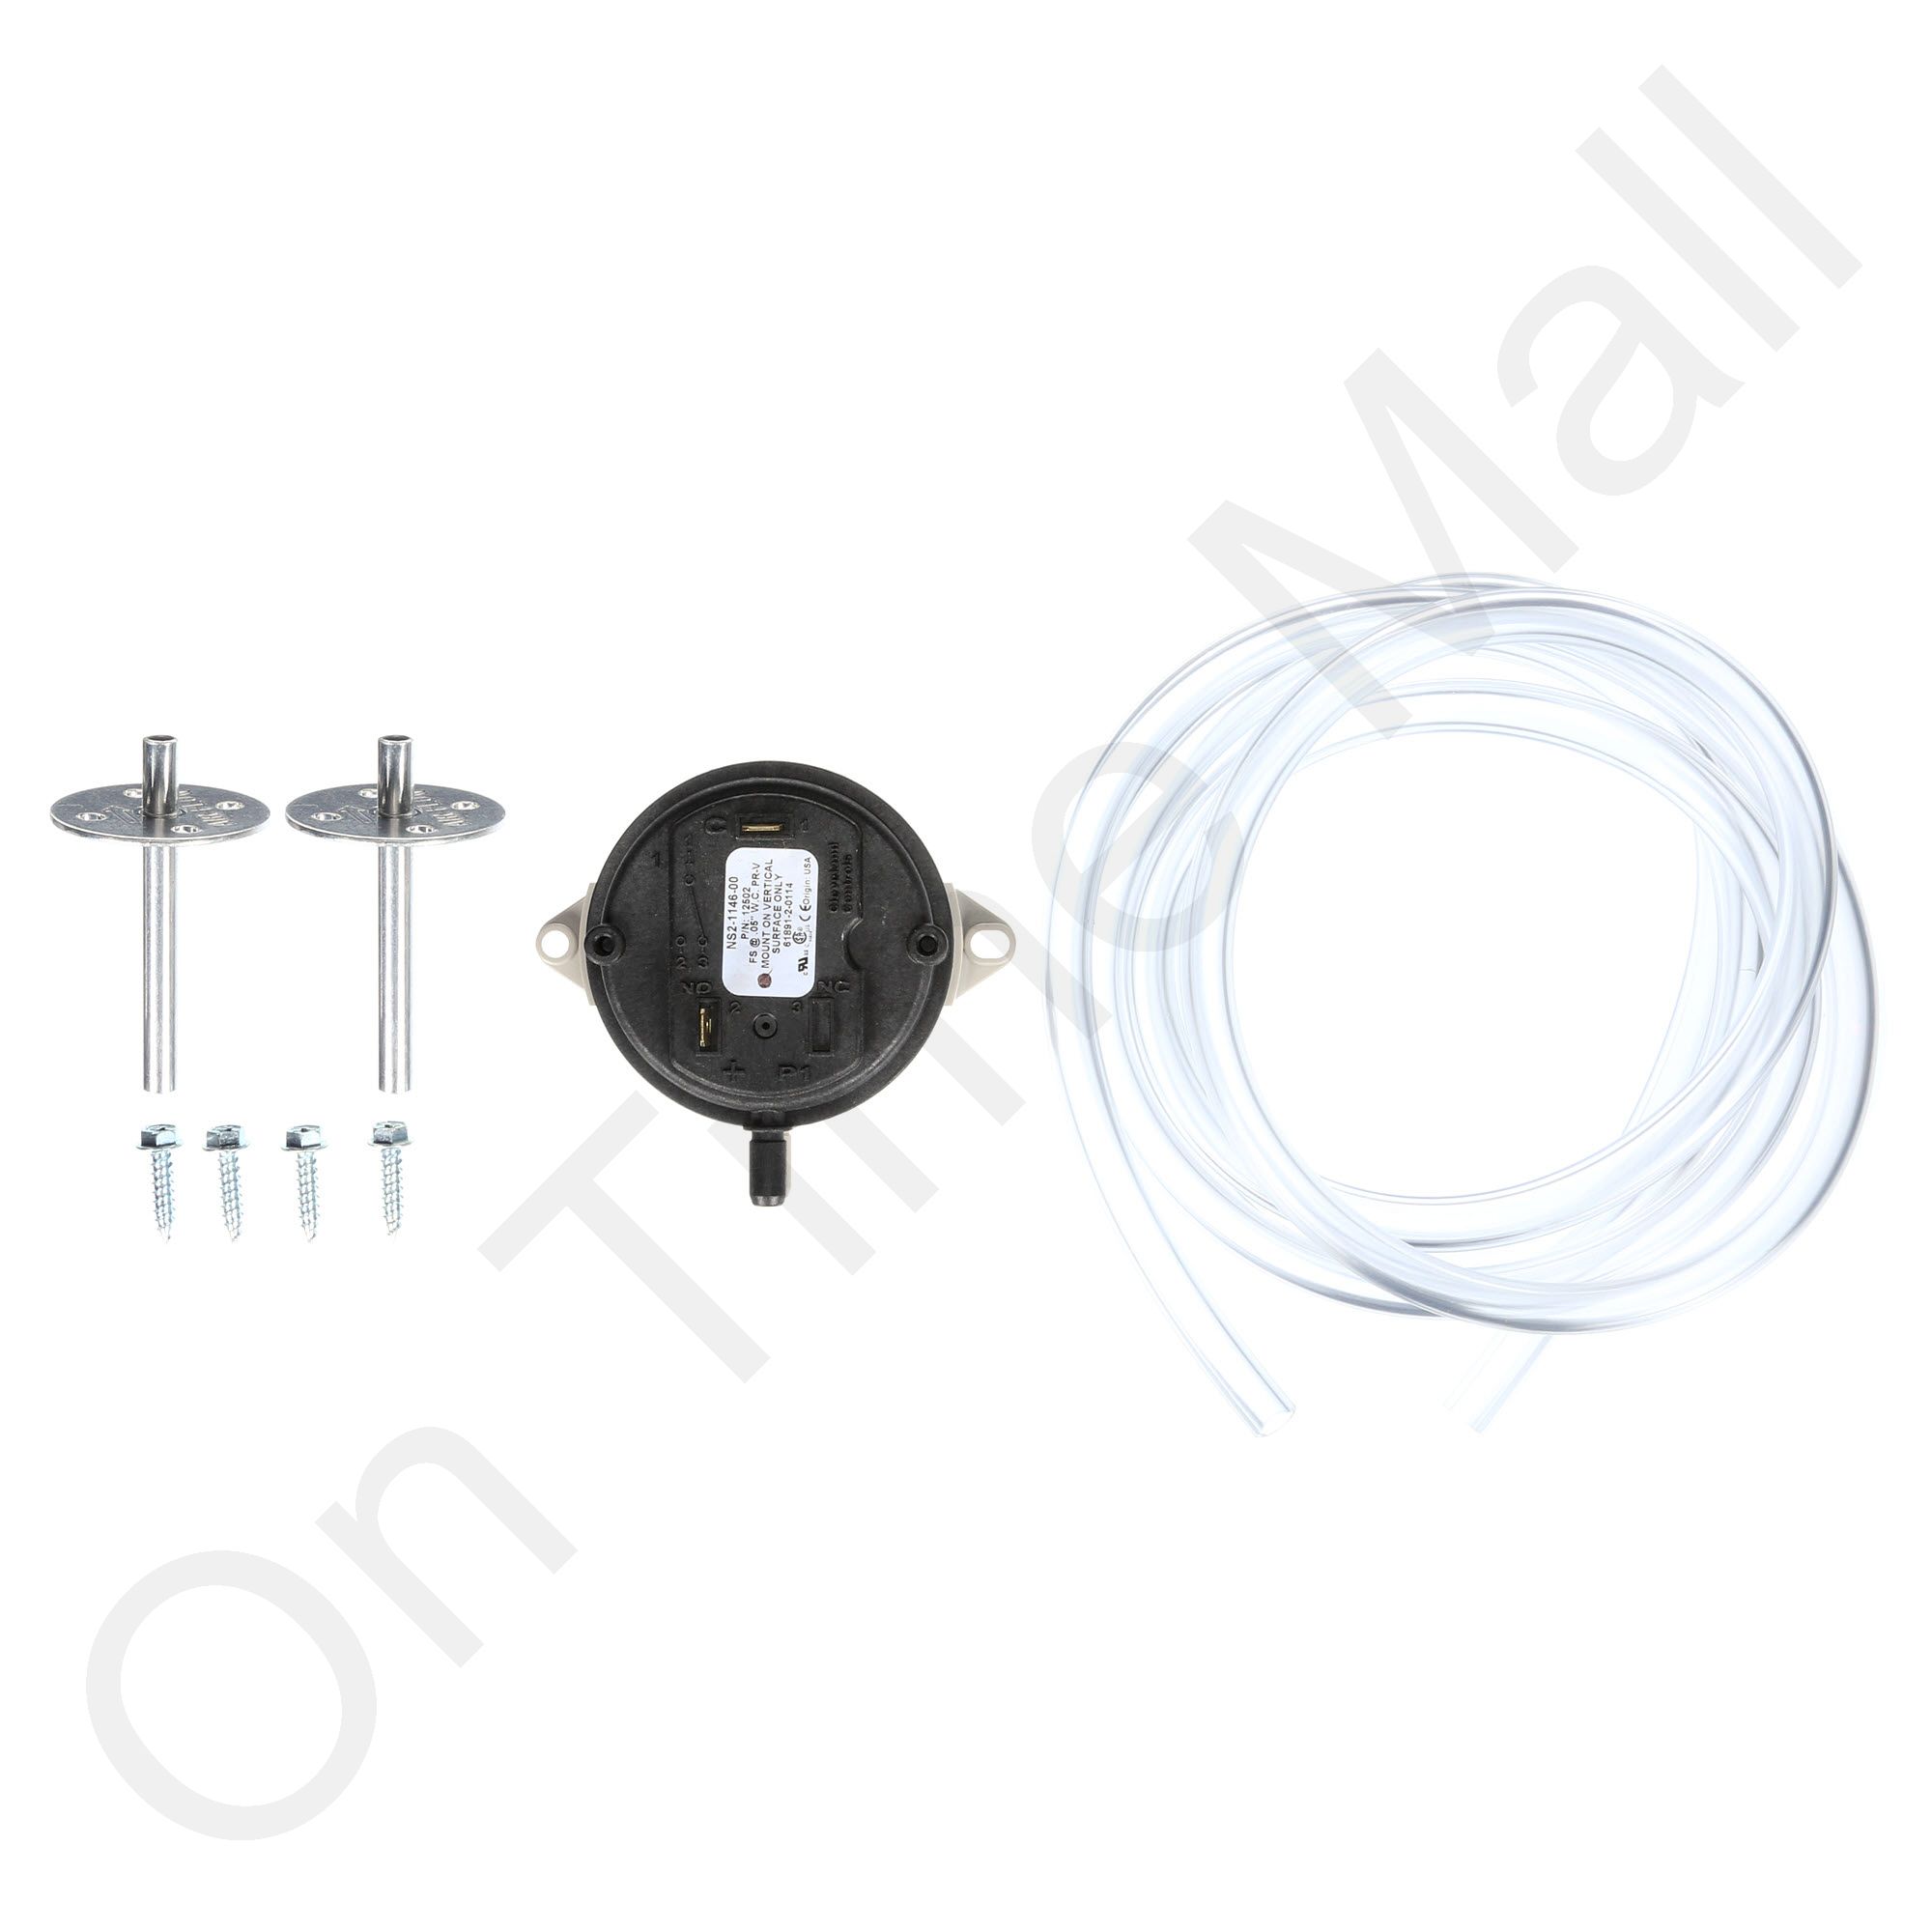 INTERNATIONAL COMFORT PRODUCTS 1009522 LP Low Pressure Switch KIT 